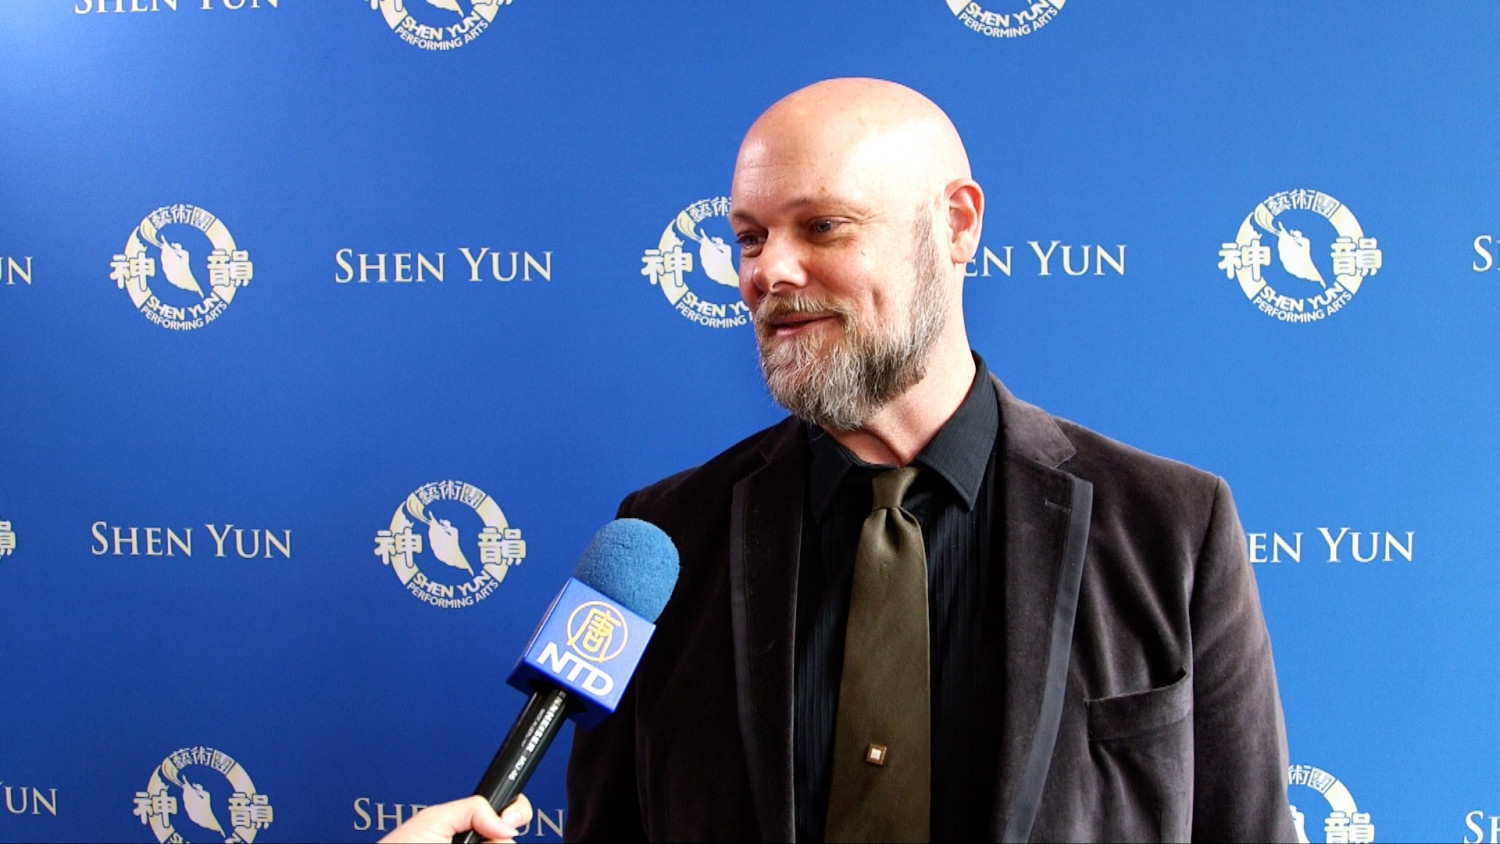 COO Touched by Shen Yun’s Honesty